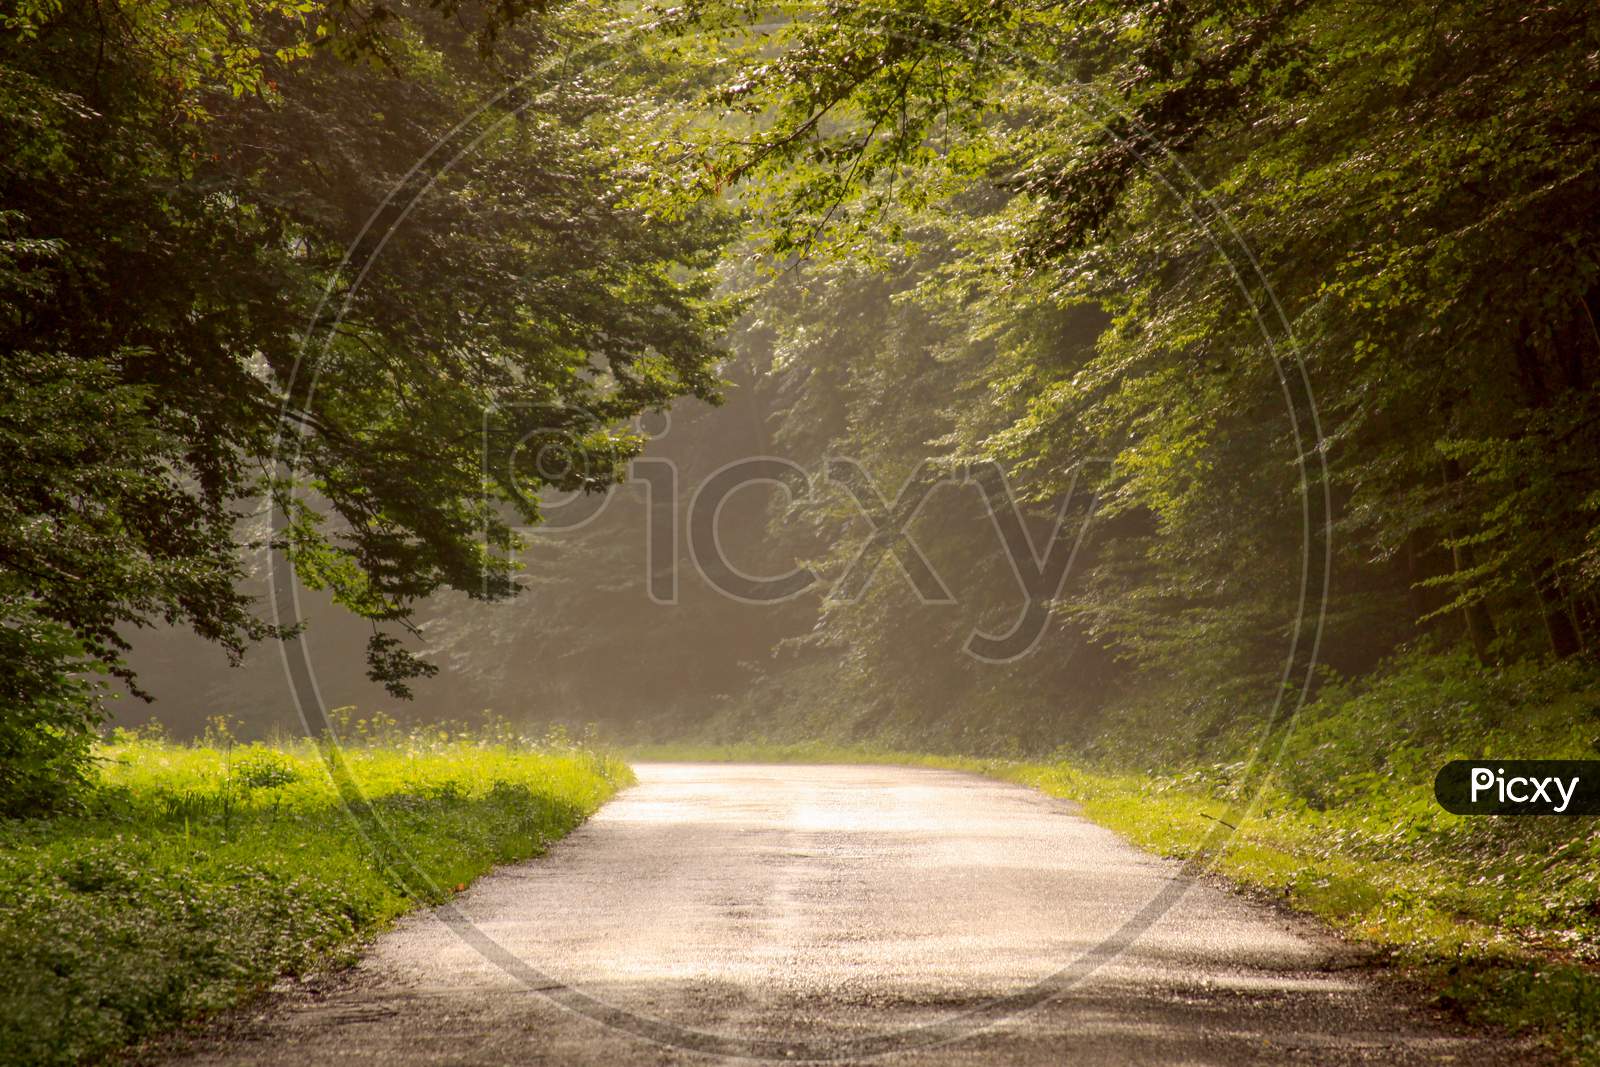 Country Road In The Forest After Rain In Serbia